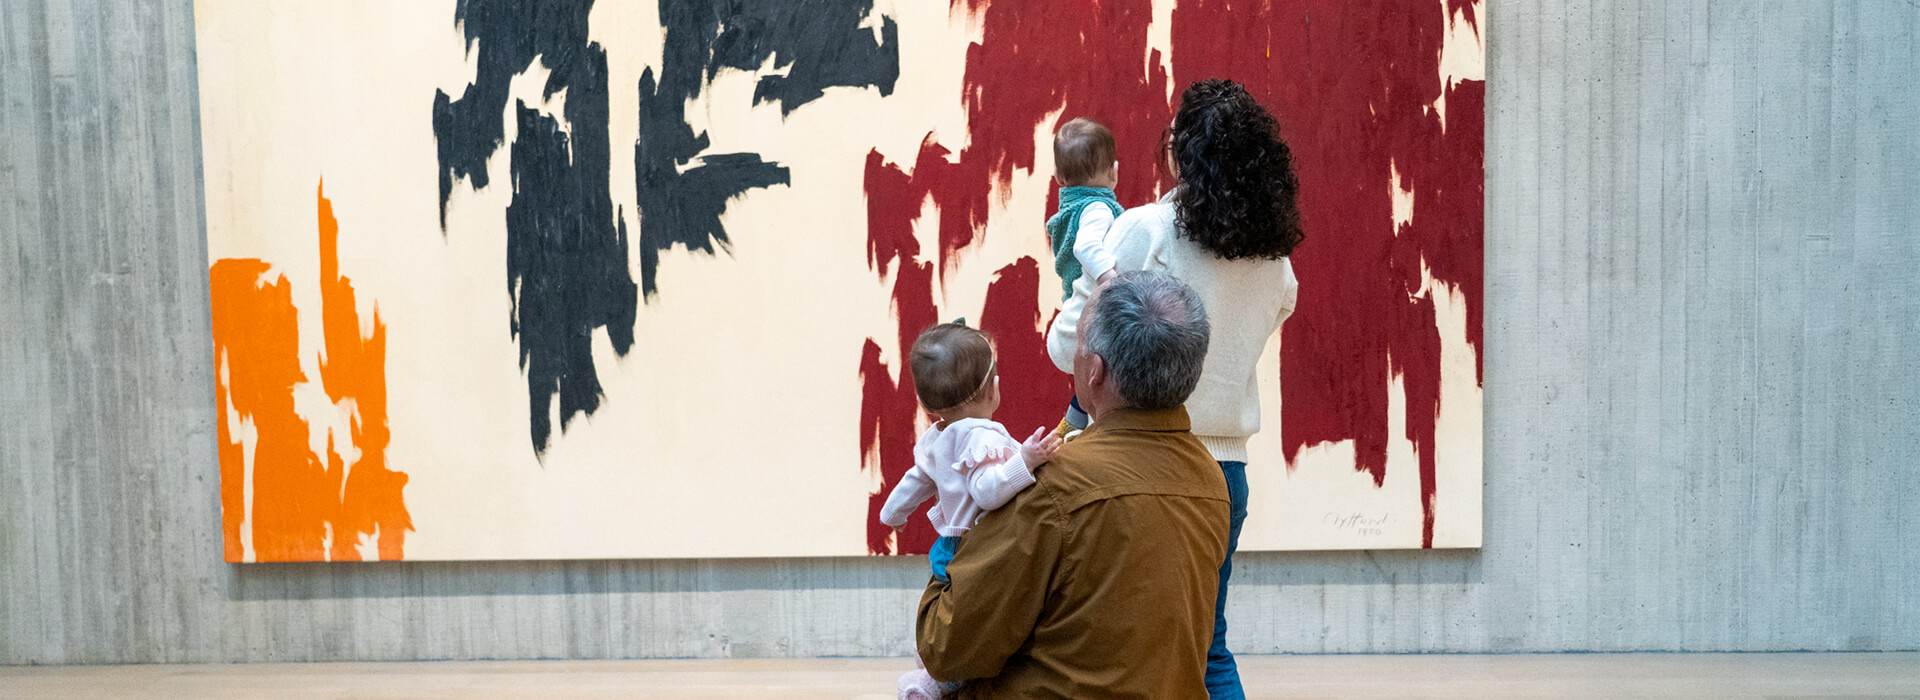 A grandfather sits holding his granddaughter while his daughter-in-law holds her son and they all look at a large abstract painting with black, red, orange, and bare canvas